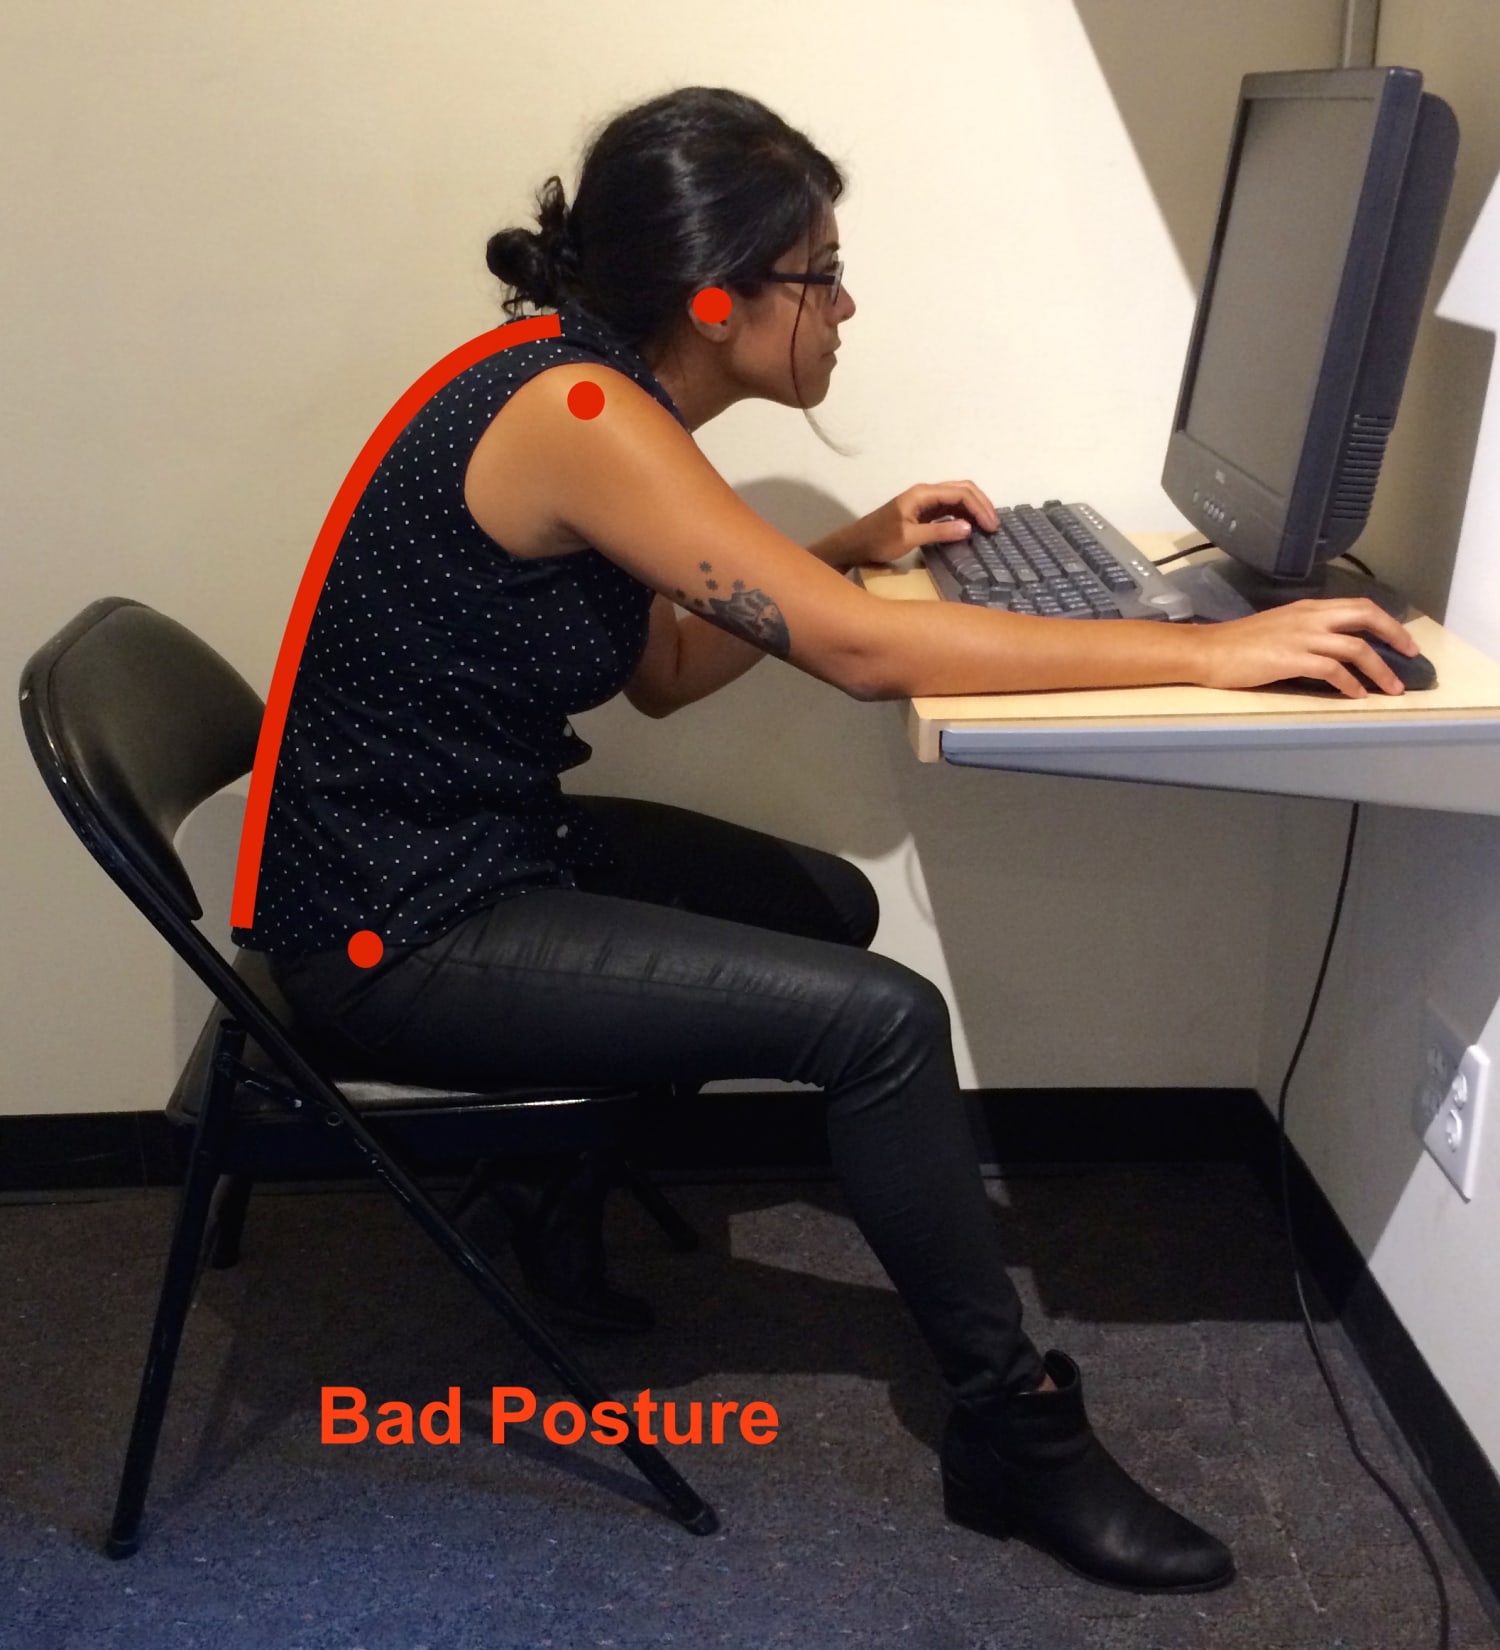 What is the Best Posture for Sitting at a Desk All Day?